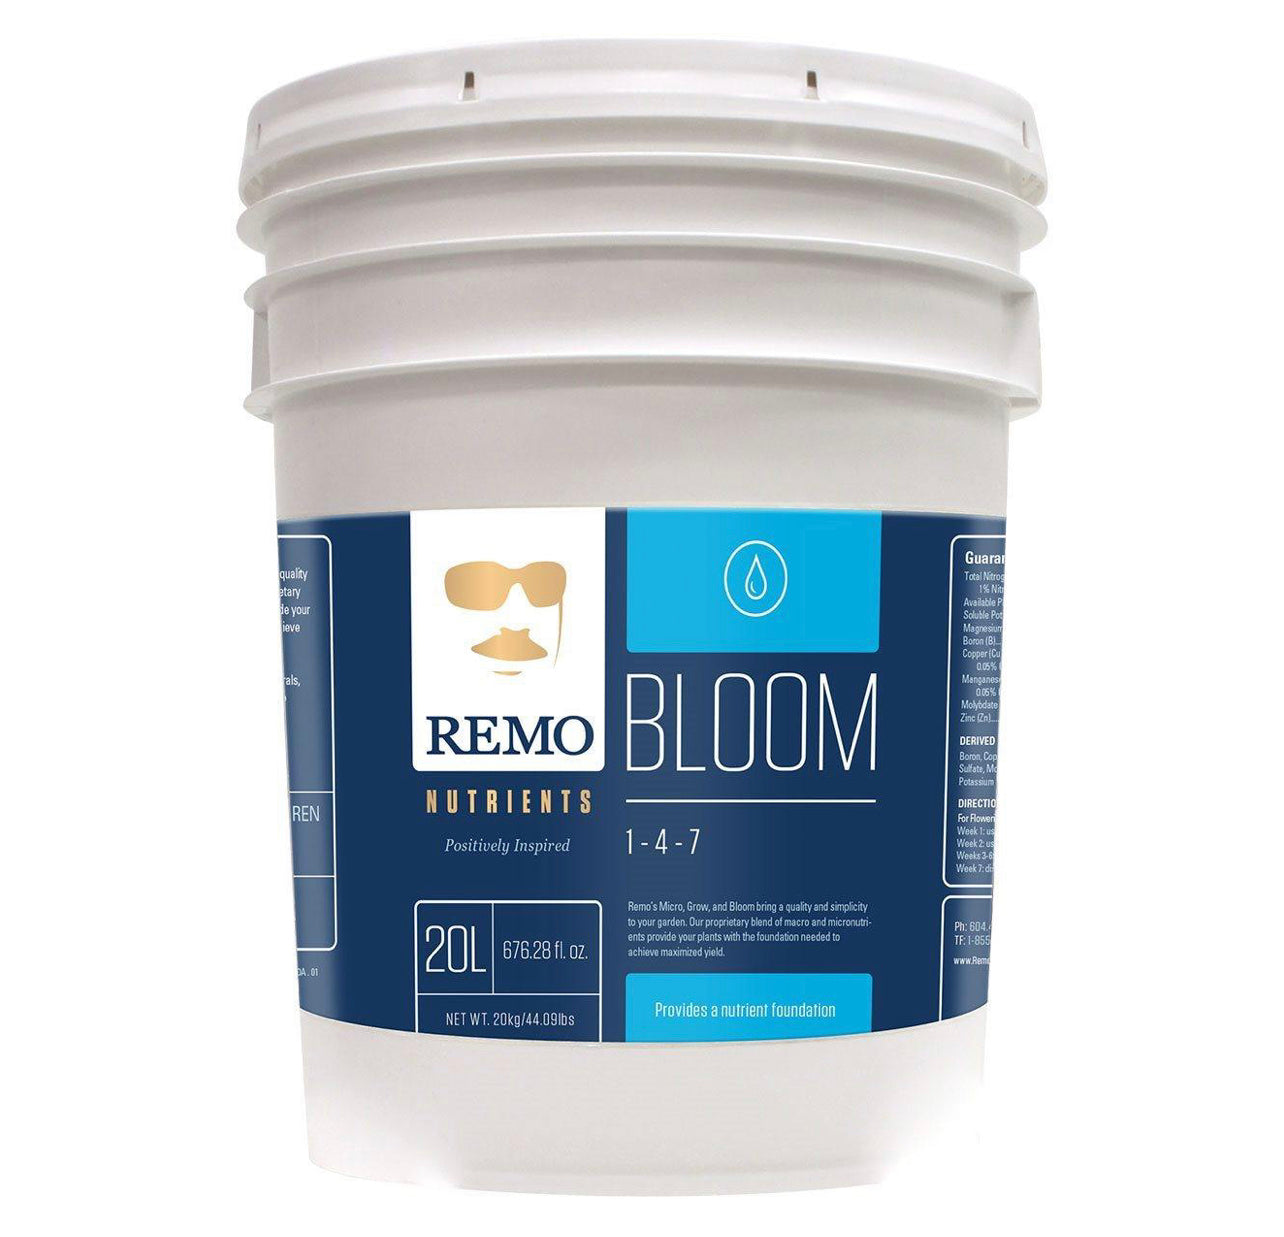 Remo Nutrients Micro, Grow, Bloom